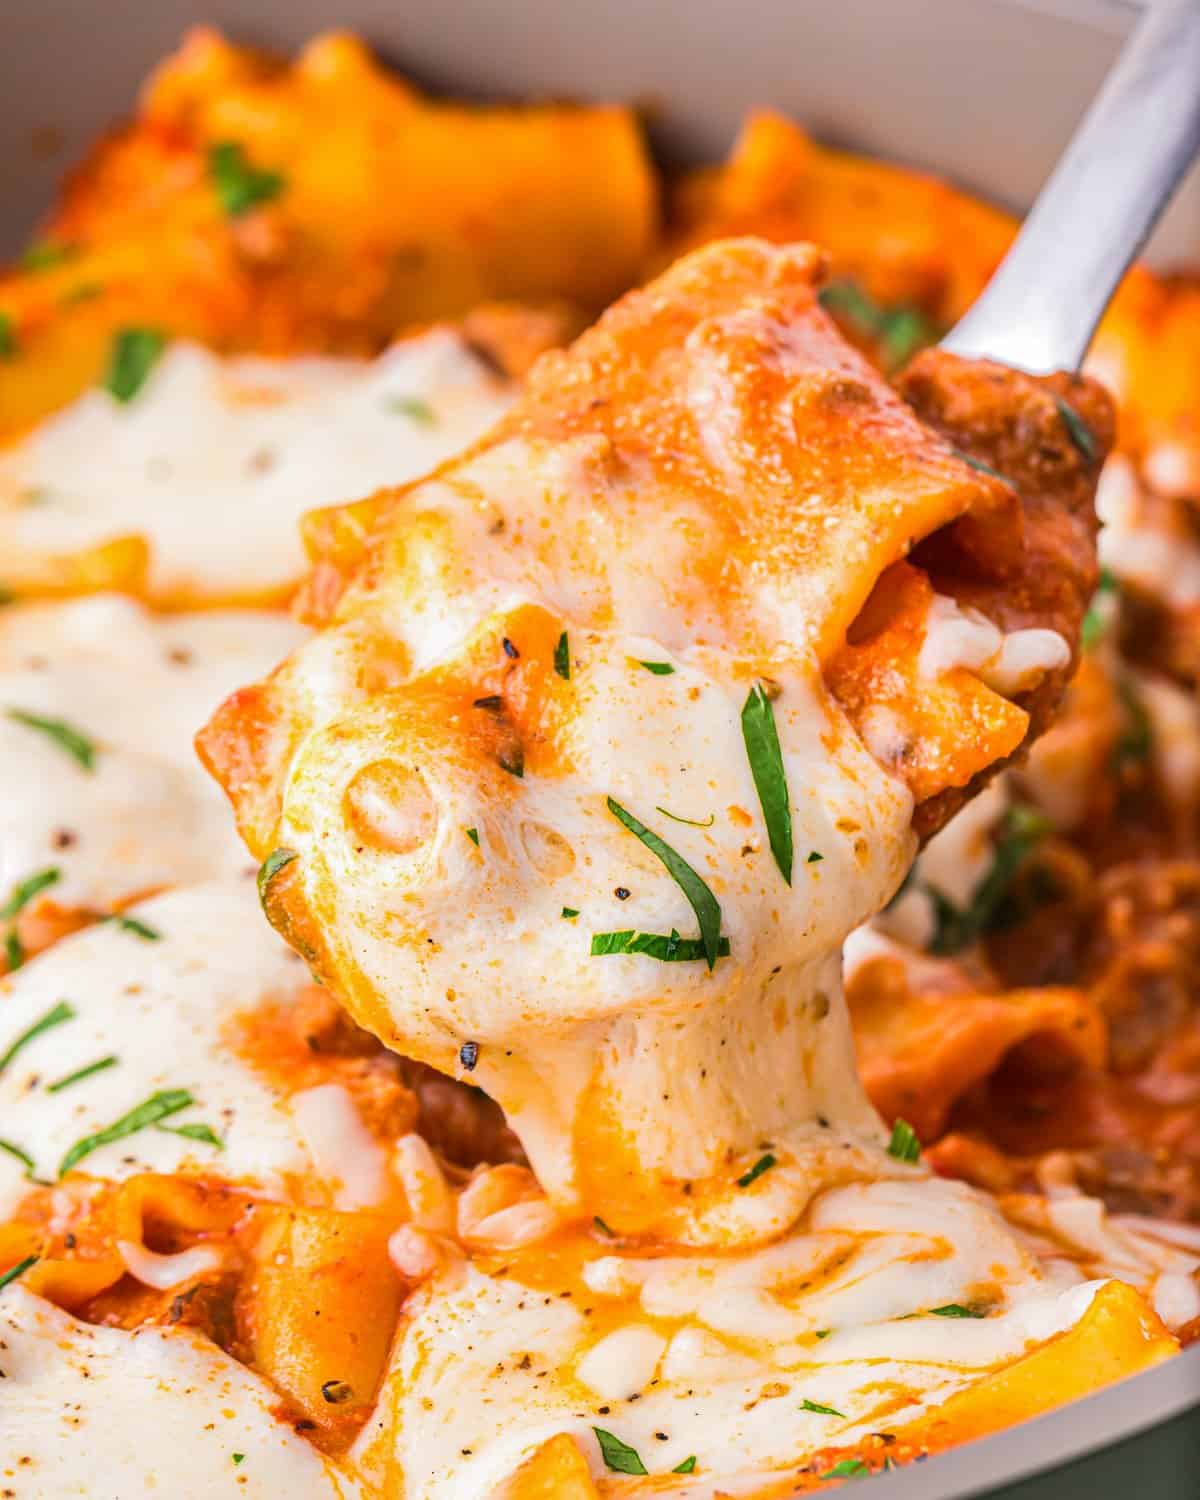 A spoon is being used to scoop up a serving of skillet lasagna.